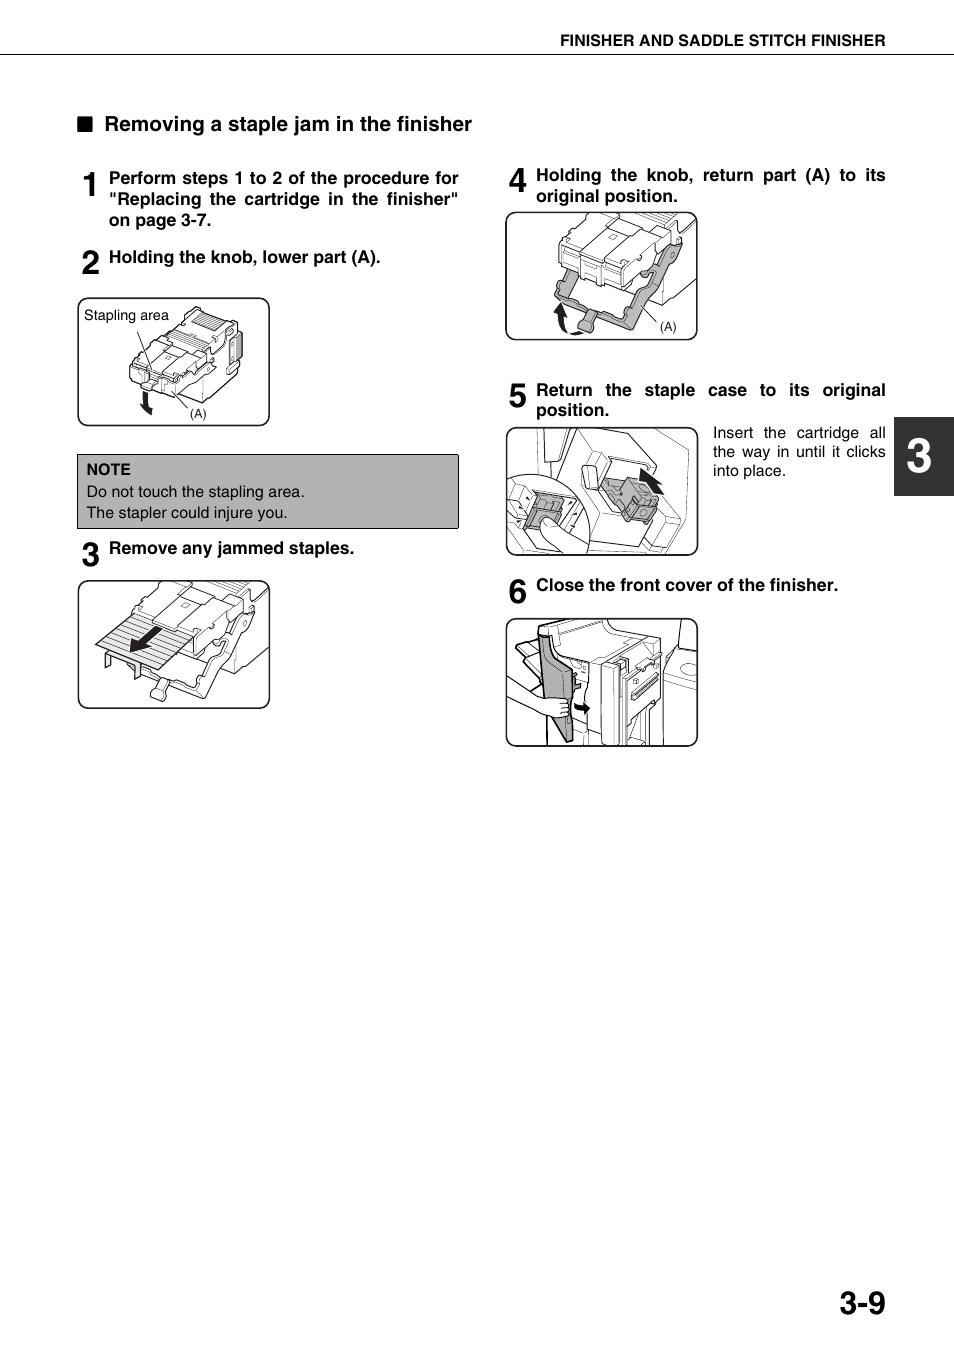 Removing a staple jam in the finisher | Sharp AR-M700N User Manual | Page 65 / 172